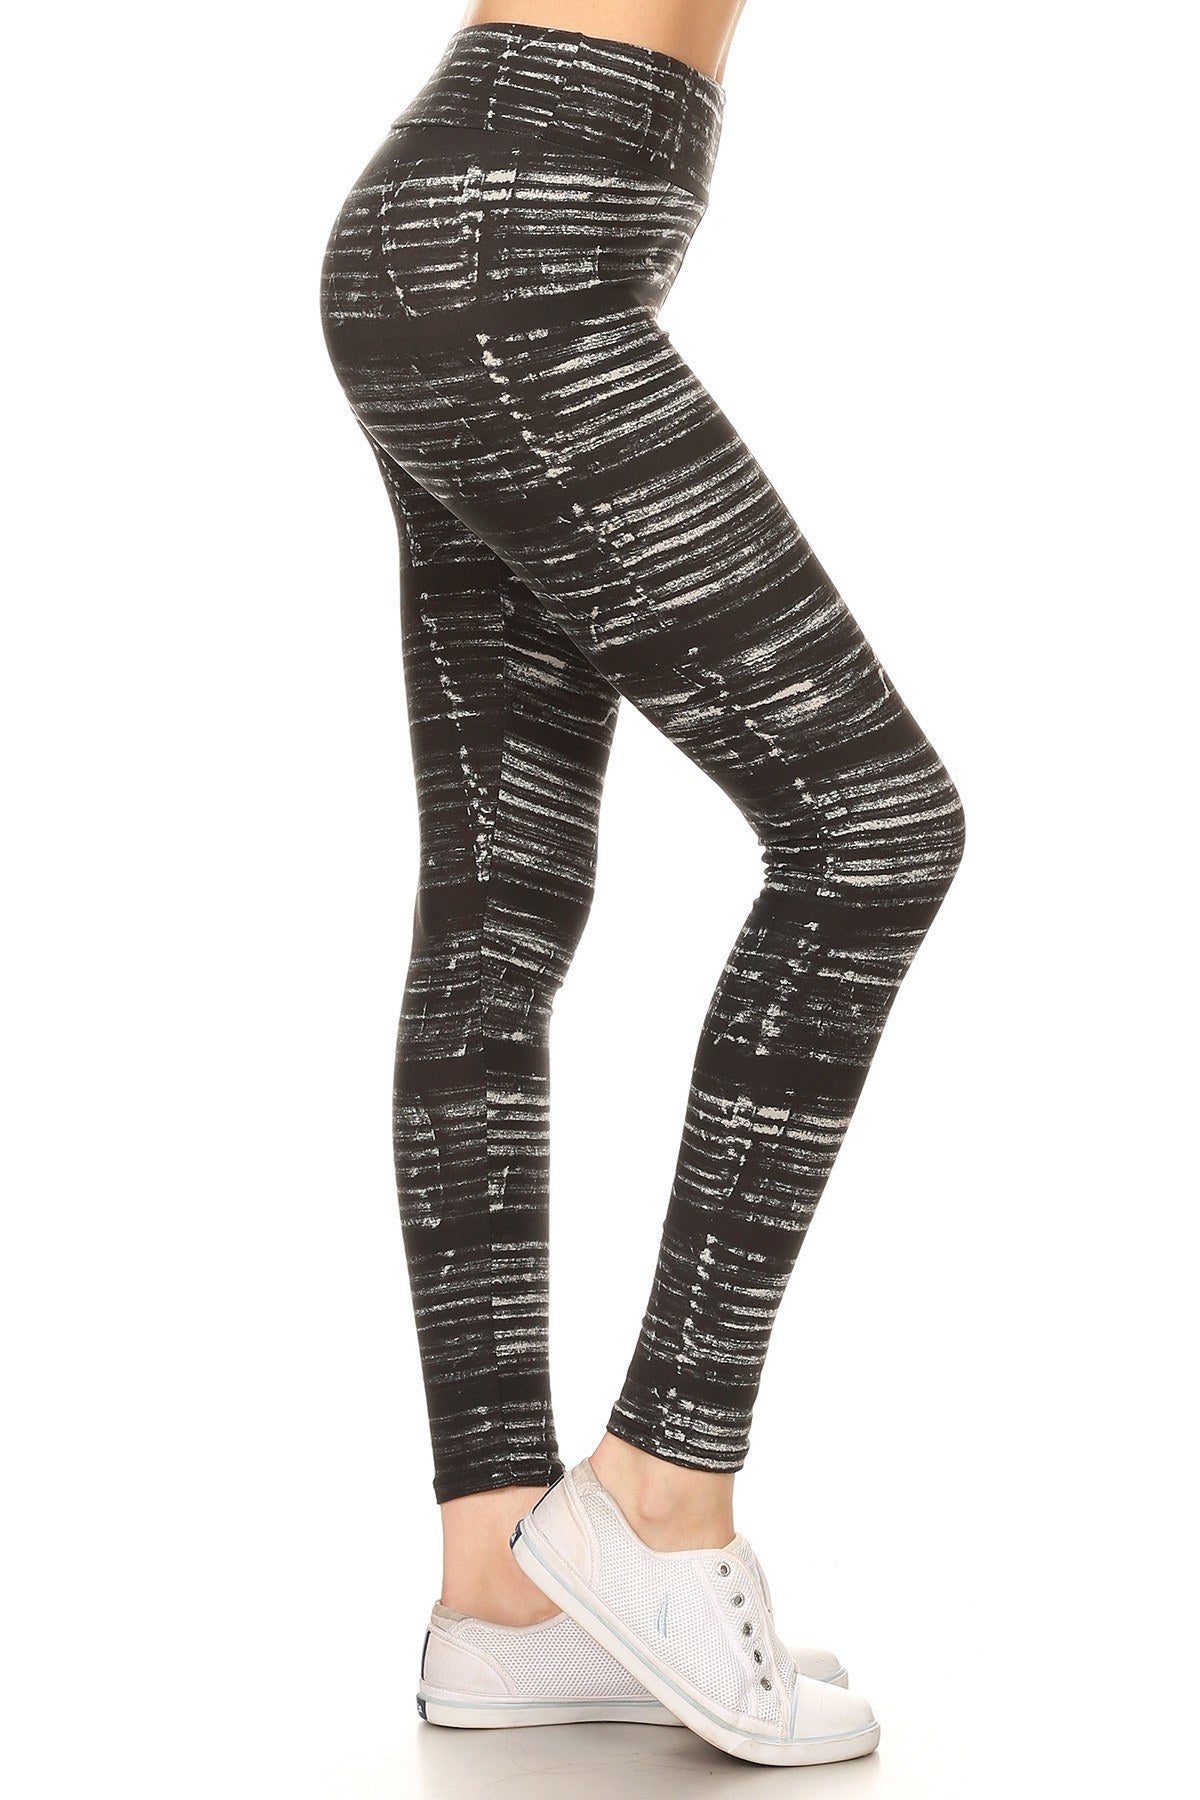 Yoga Style Banded Lined Multicolor Print Leggings